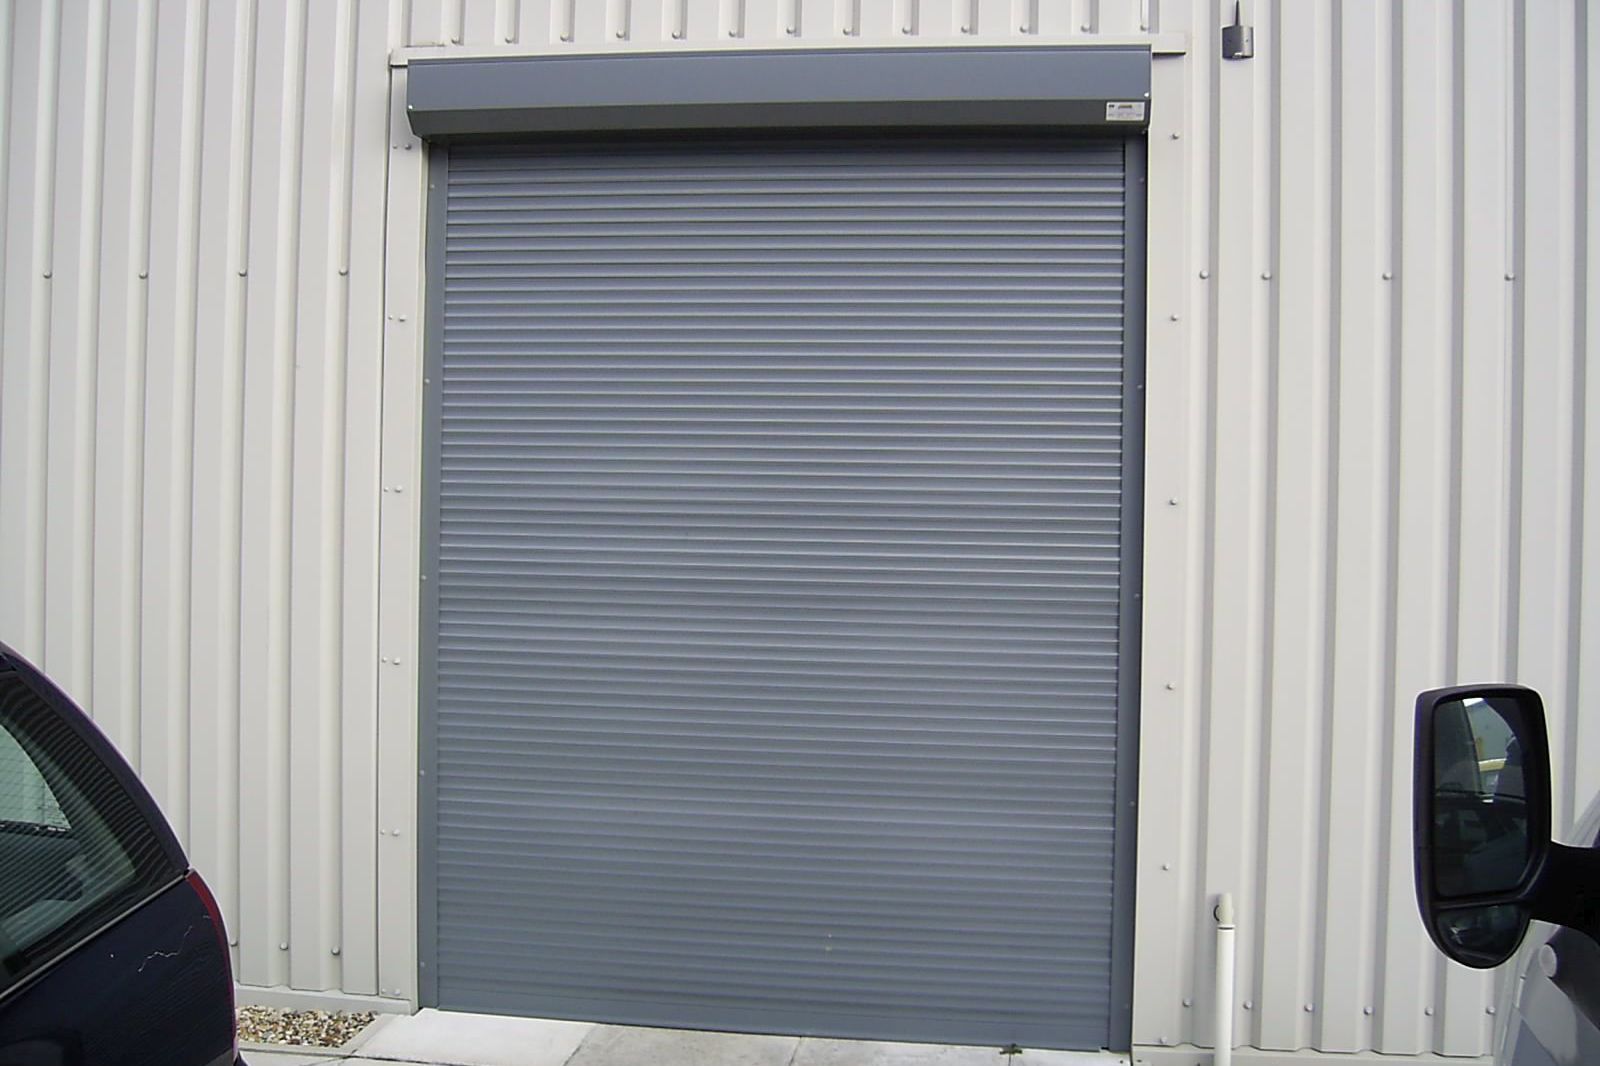 Security shutter over access point of business